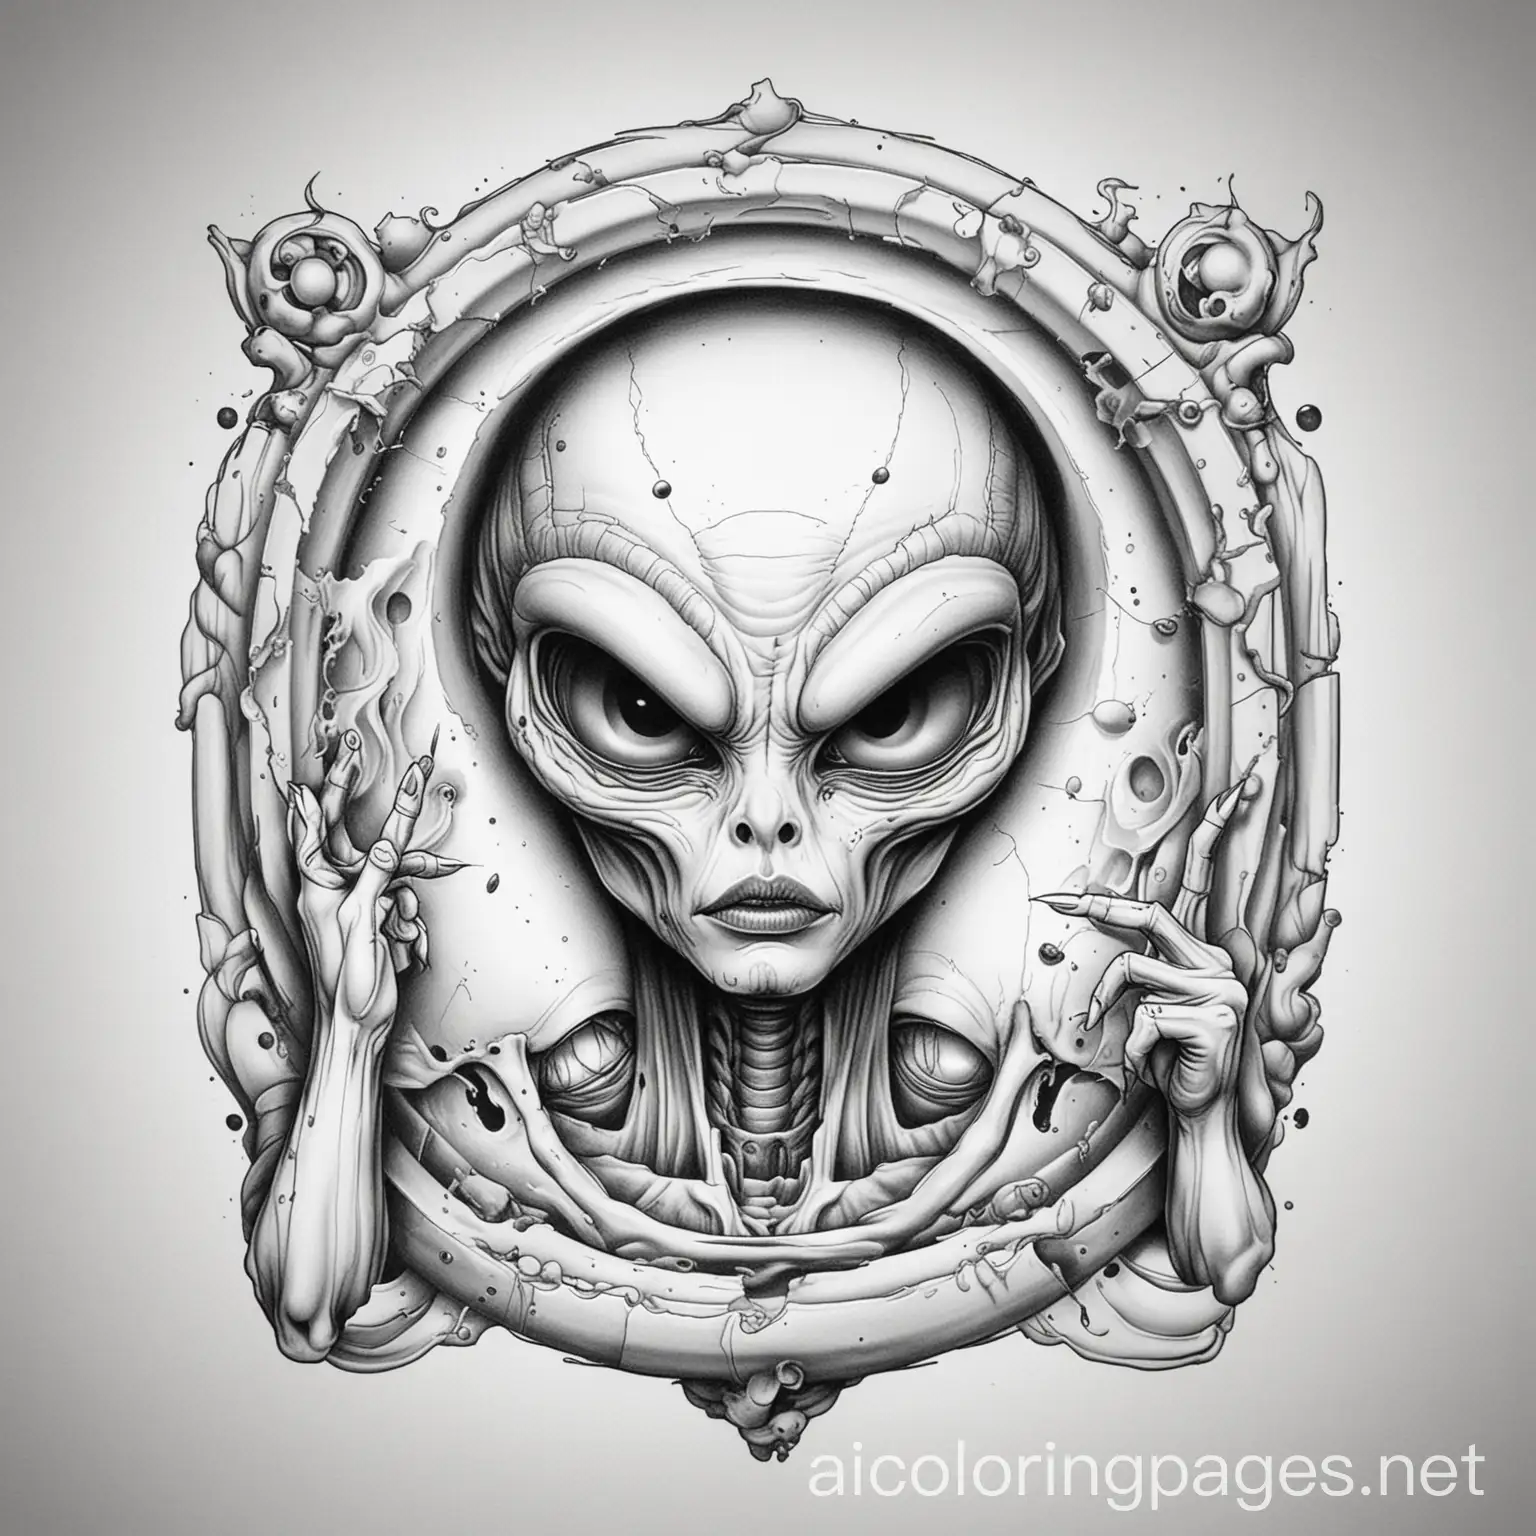 Alien-Smoking-Joint-with-Peace-Sign-by-Open-Portal